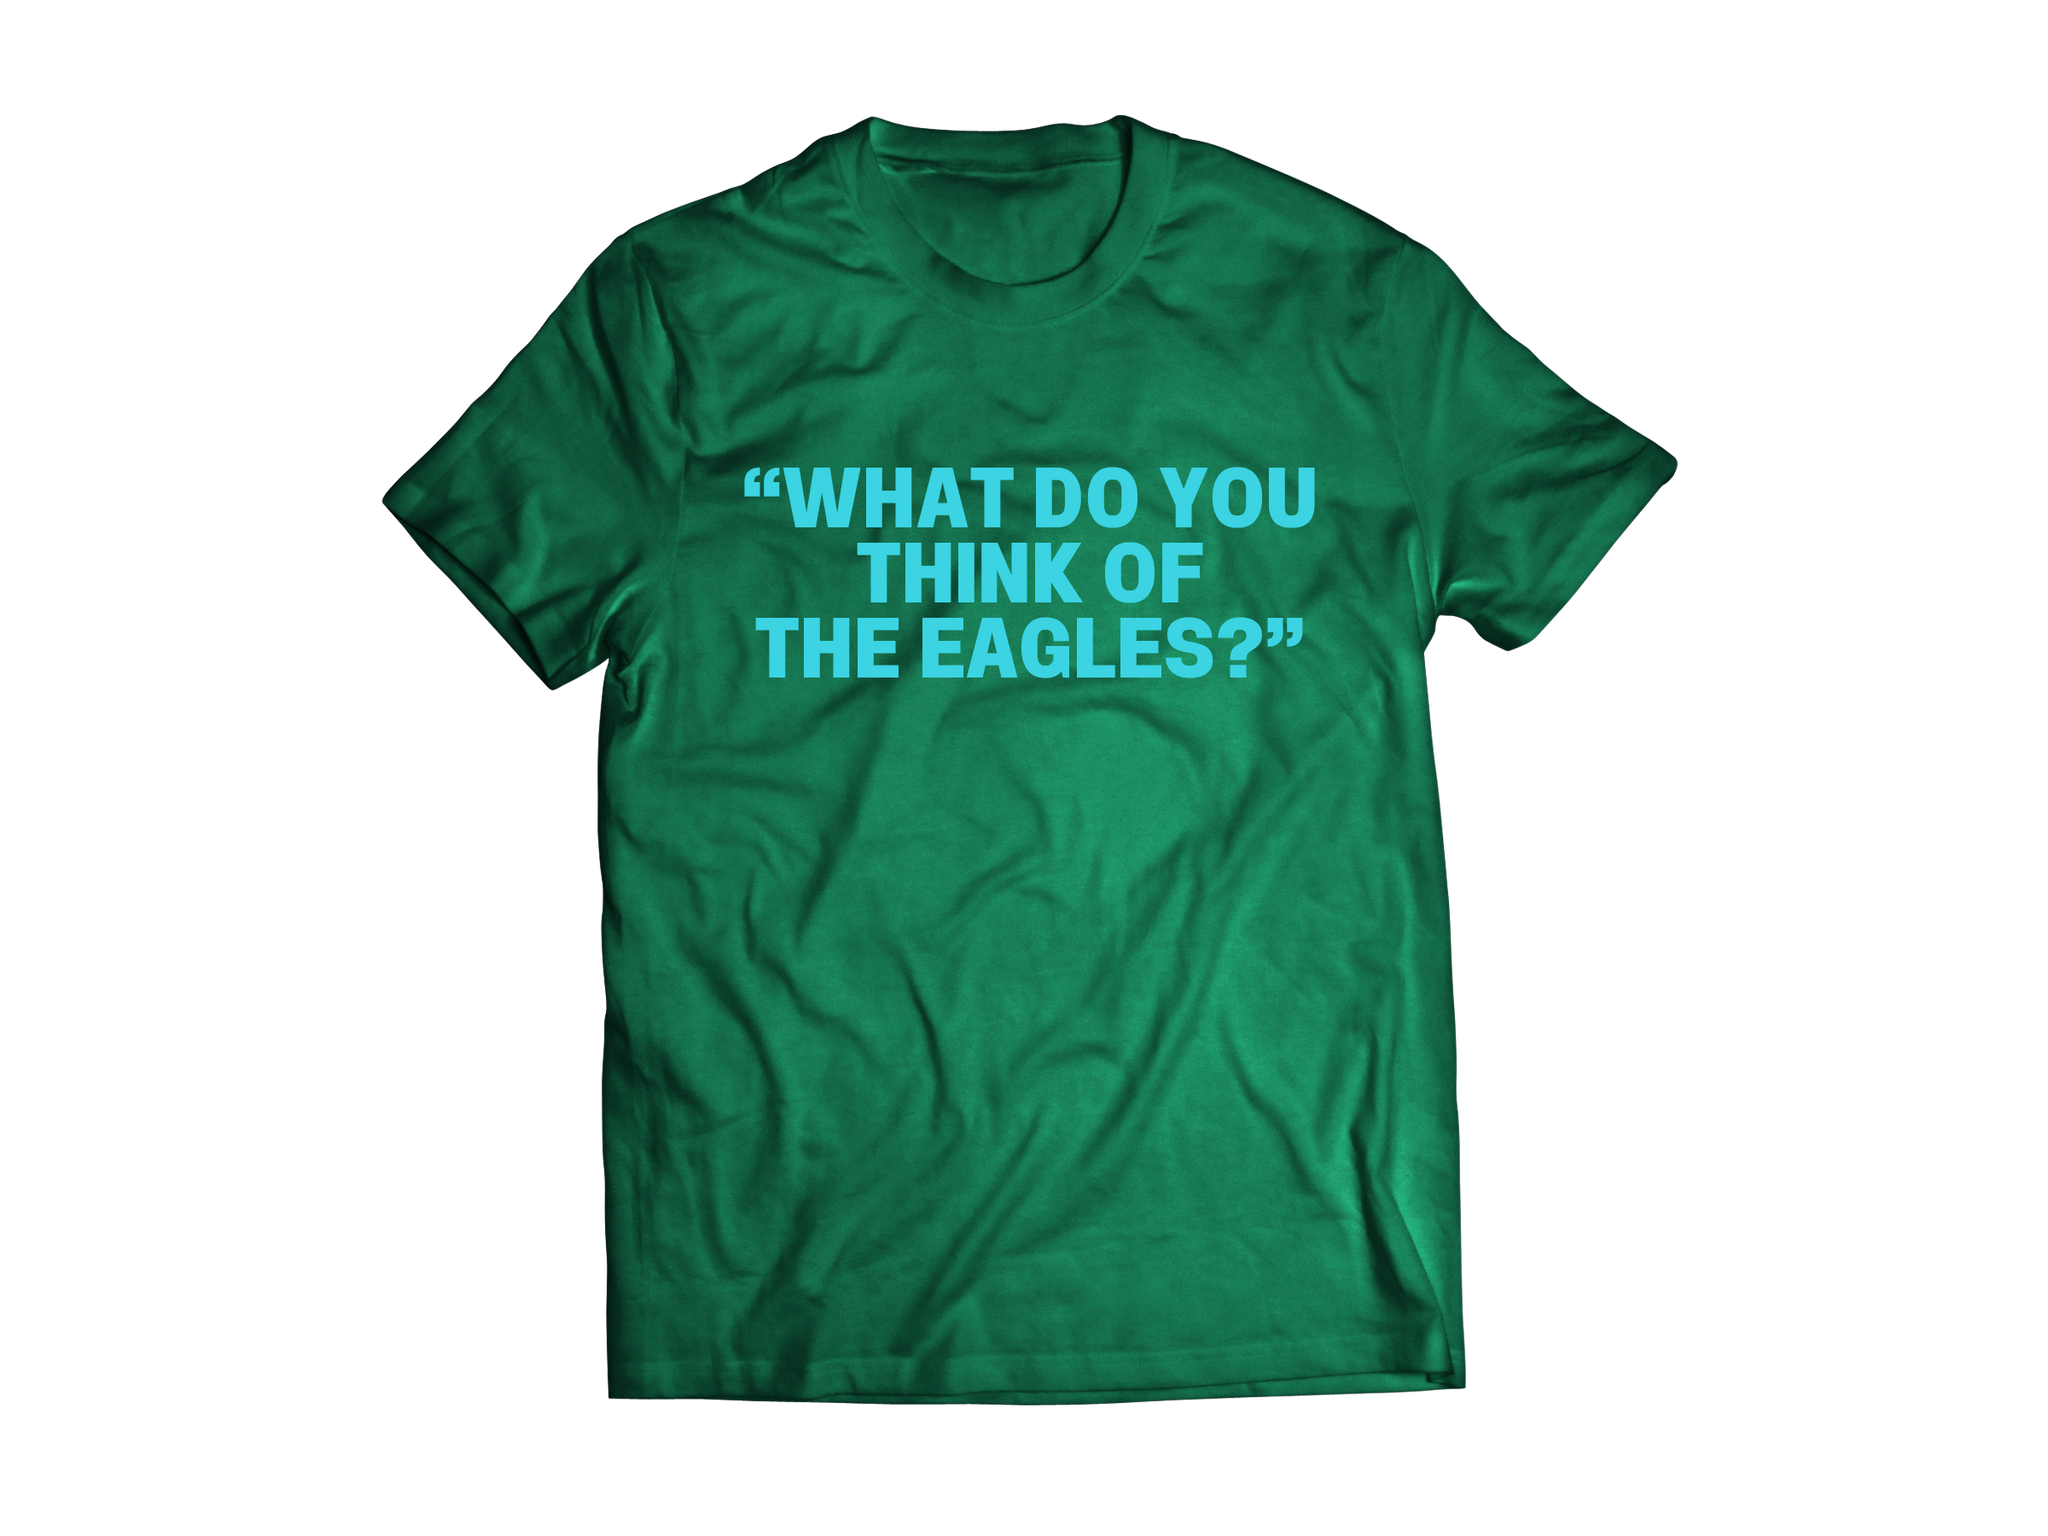 BRET EASTON ELLIS: "WHAT DO YOU THINK OF THE EAGLES?" GREEN T-SHIRT